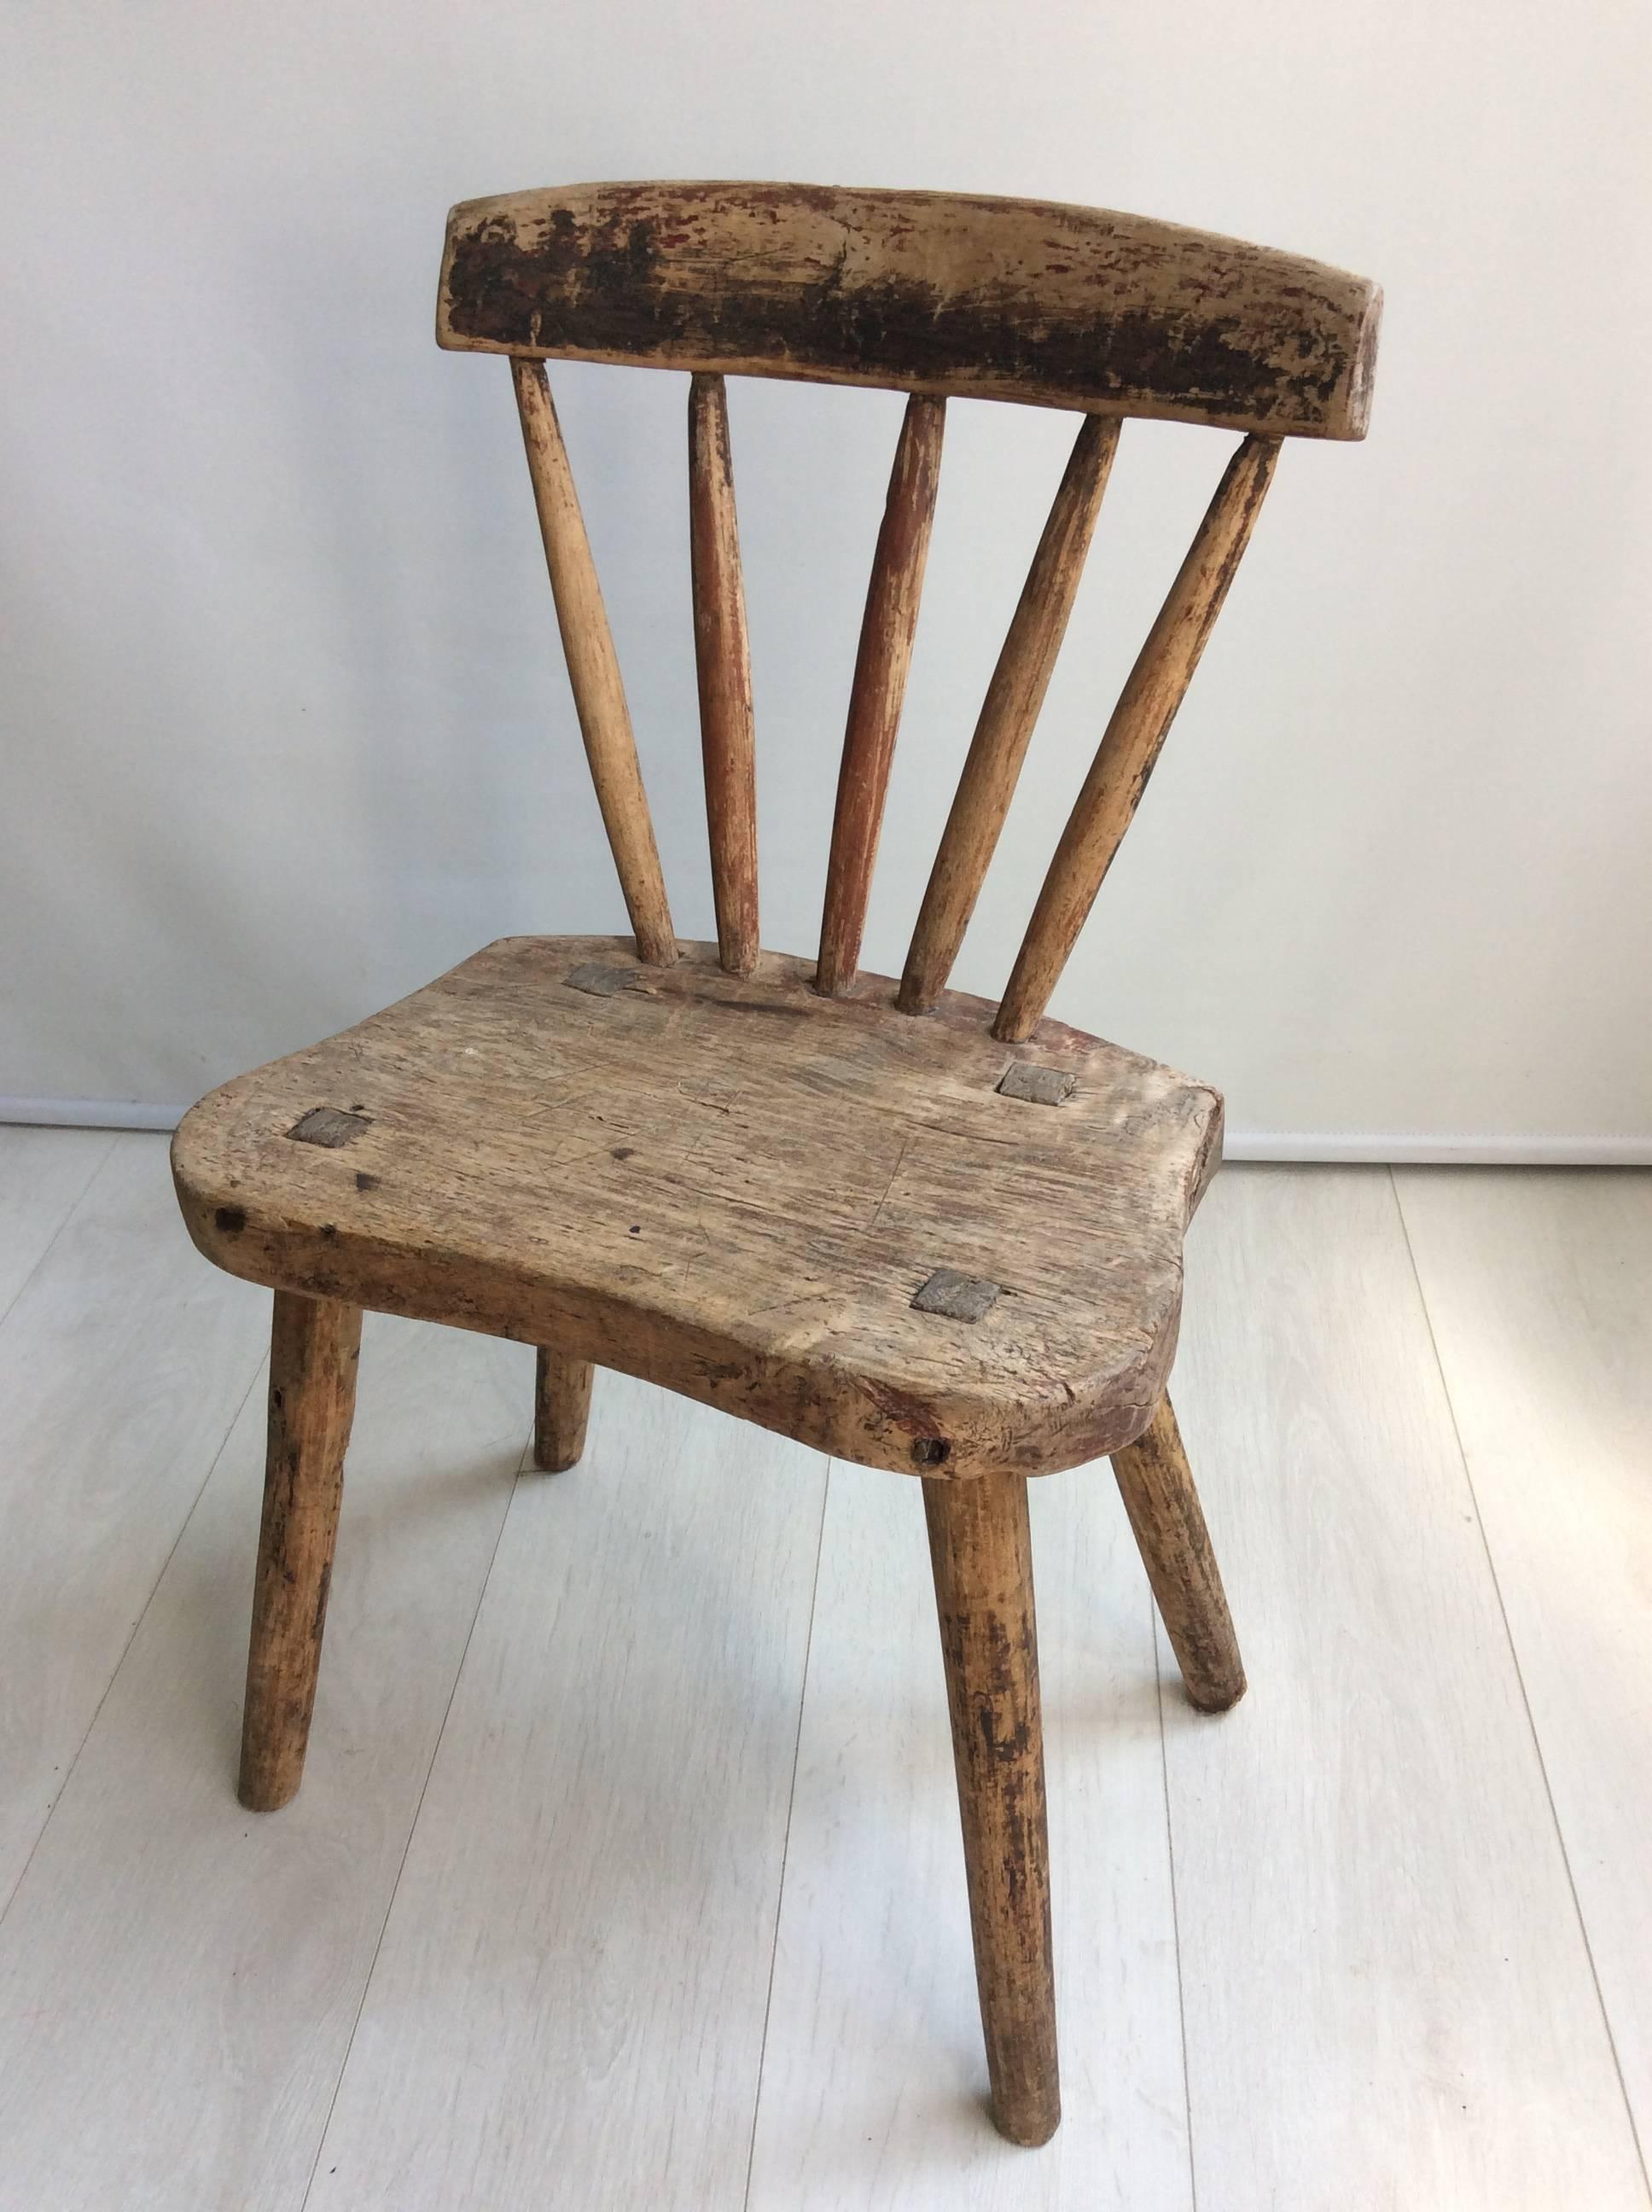 Primitive Swedish Wooden Chair from Dalarna For Sale 3